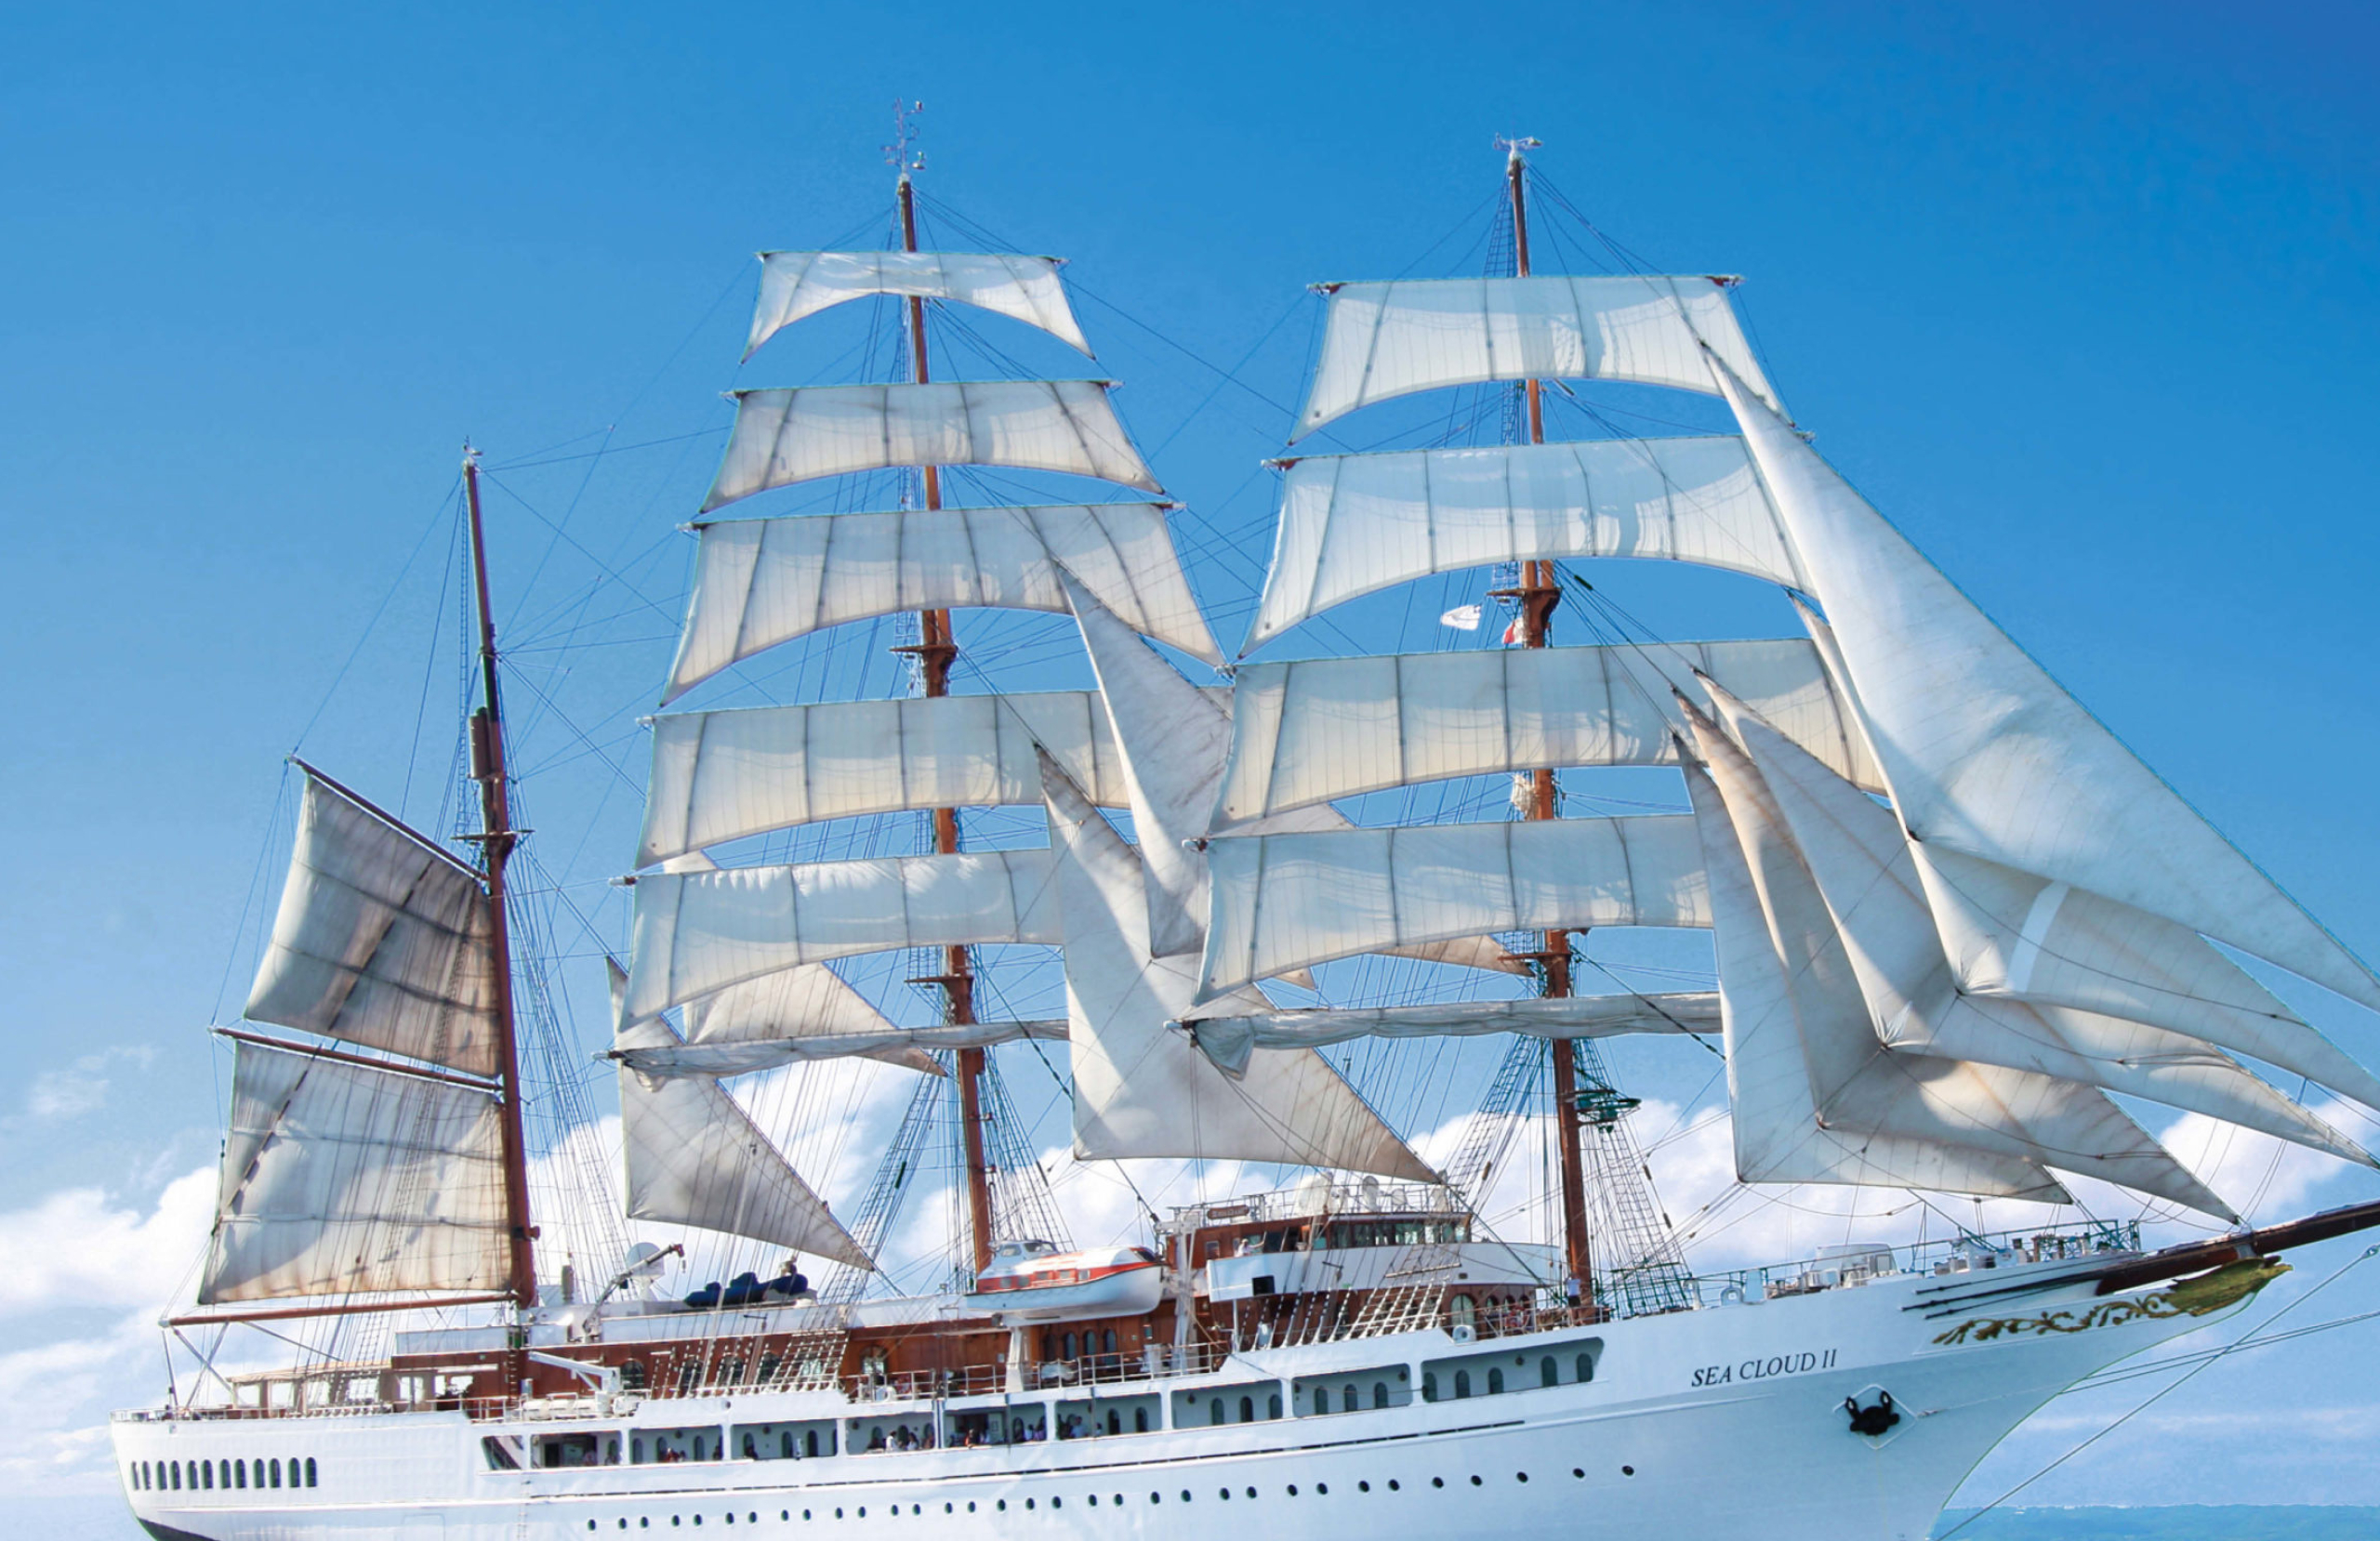 Windjammer: A ship with masts and sails, powered by the wind, Sea Cloud II. 2560x1660 HD Wallpaper.